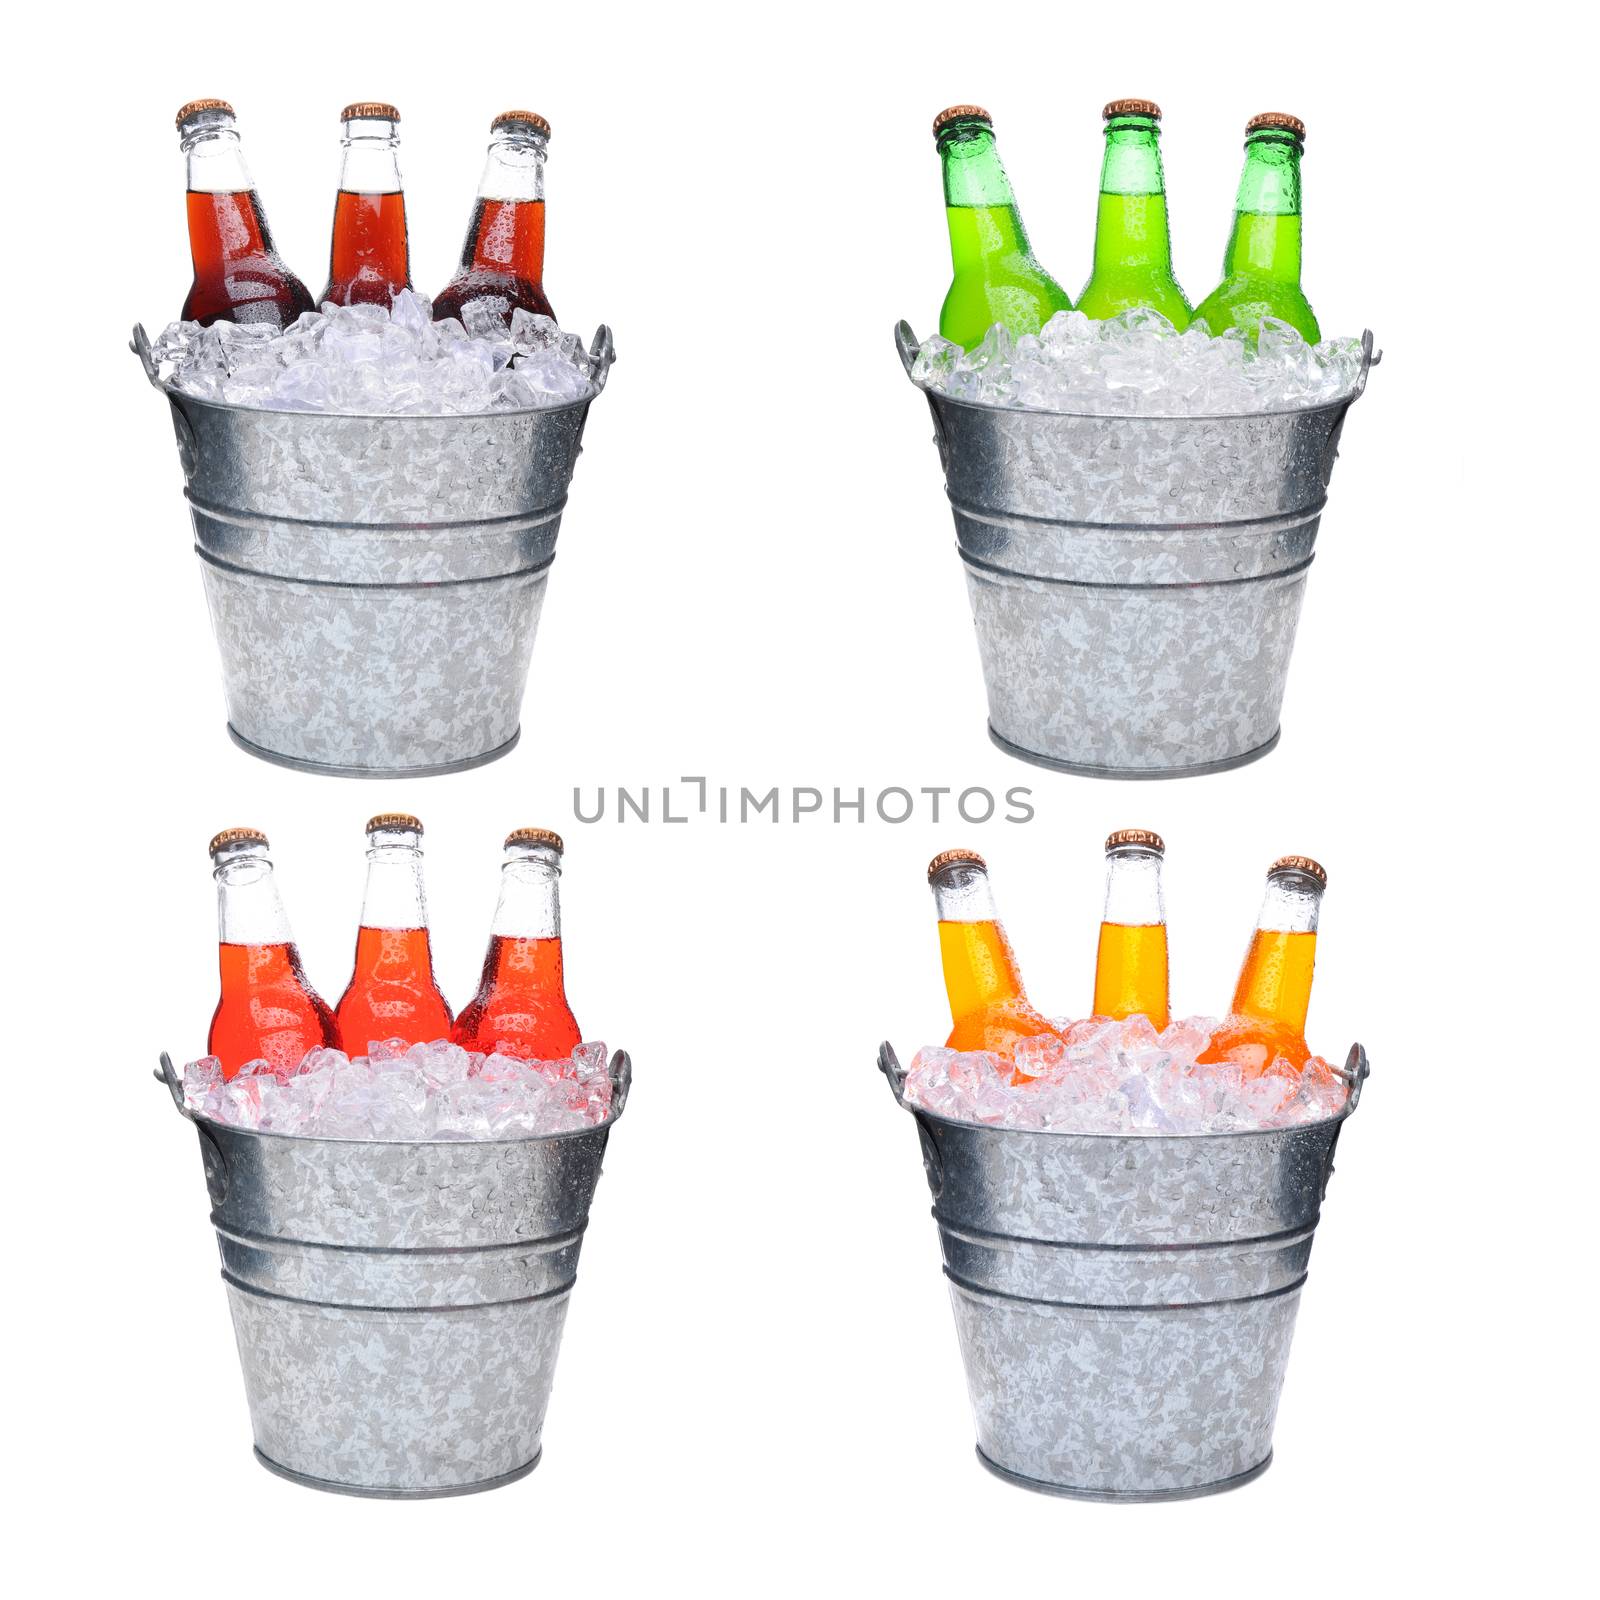 Four ice Buckets Filled with three soda bottles, each pail has a different flavored soft drink, Lemon-Lime, Cola, Orange and Strawberry.